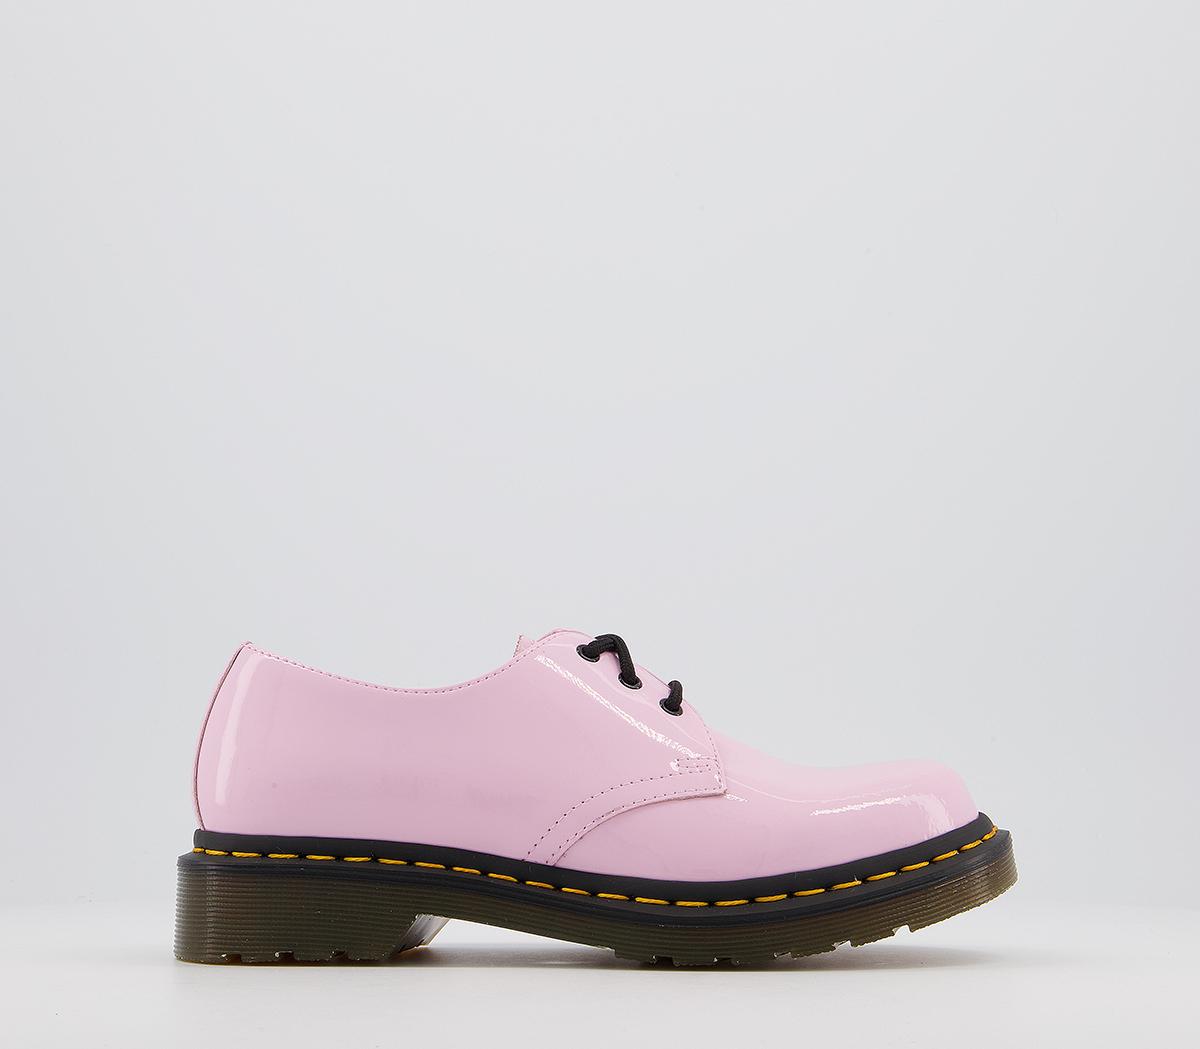 Dr. Martens 1461 3 Eye Pale Pink Patent - Shoes for Women